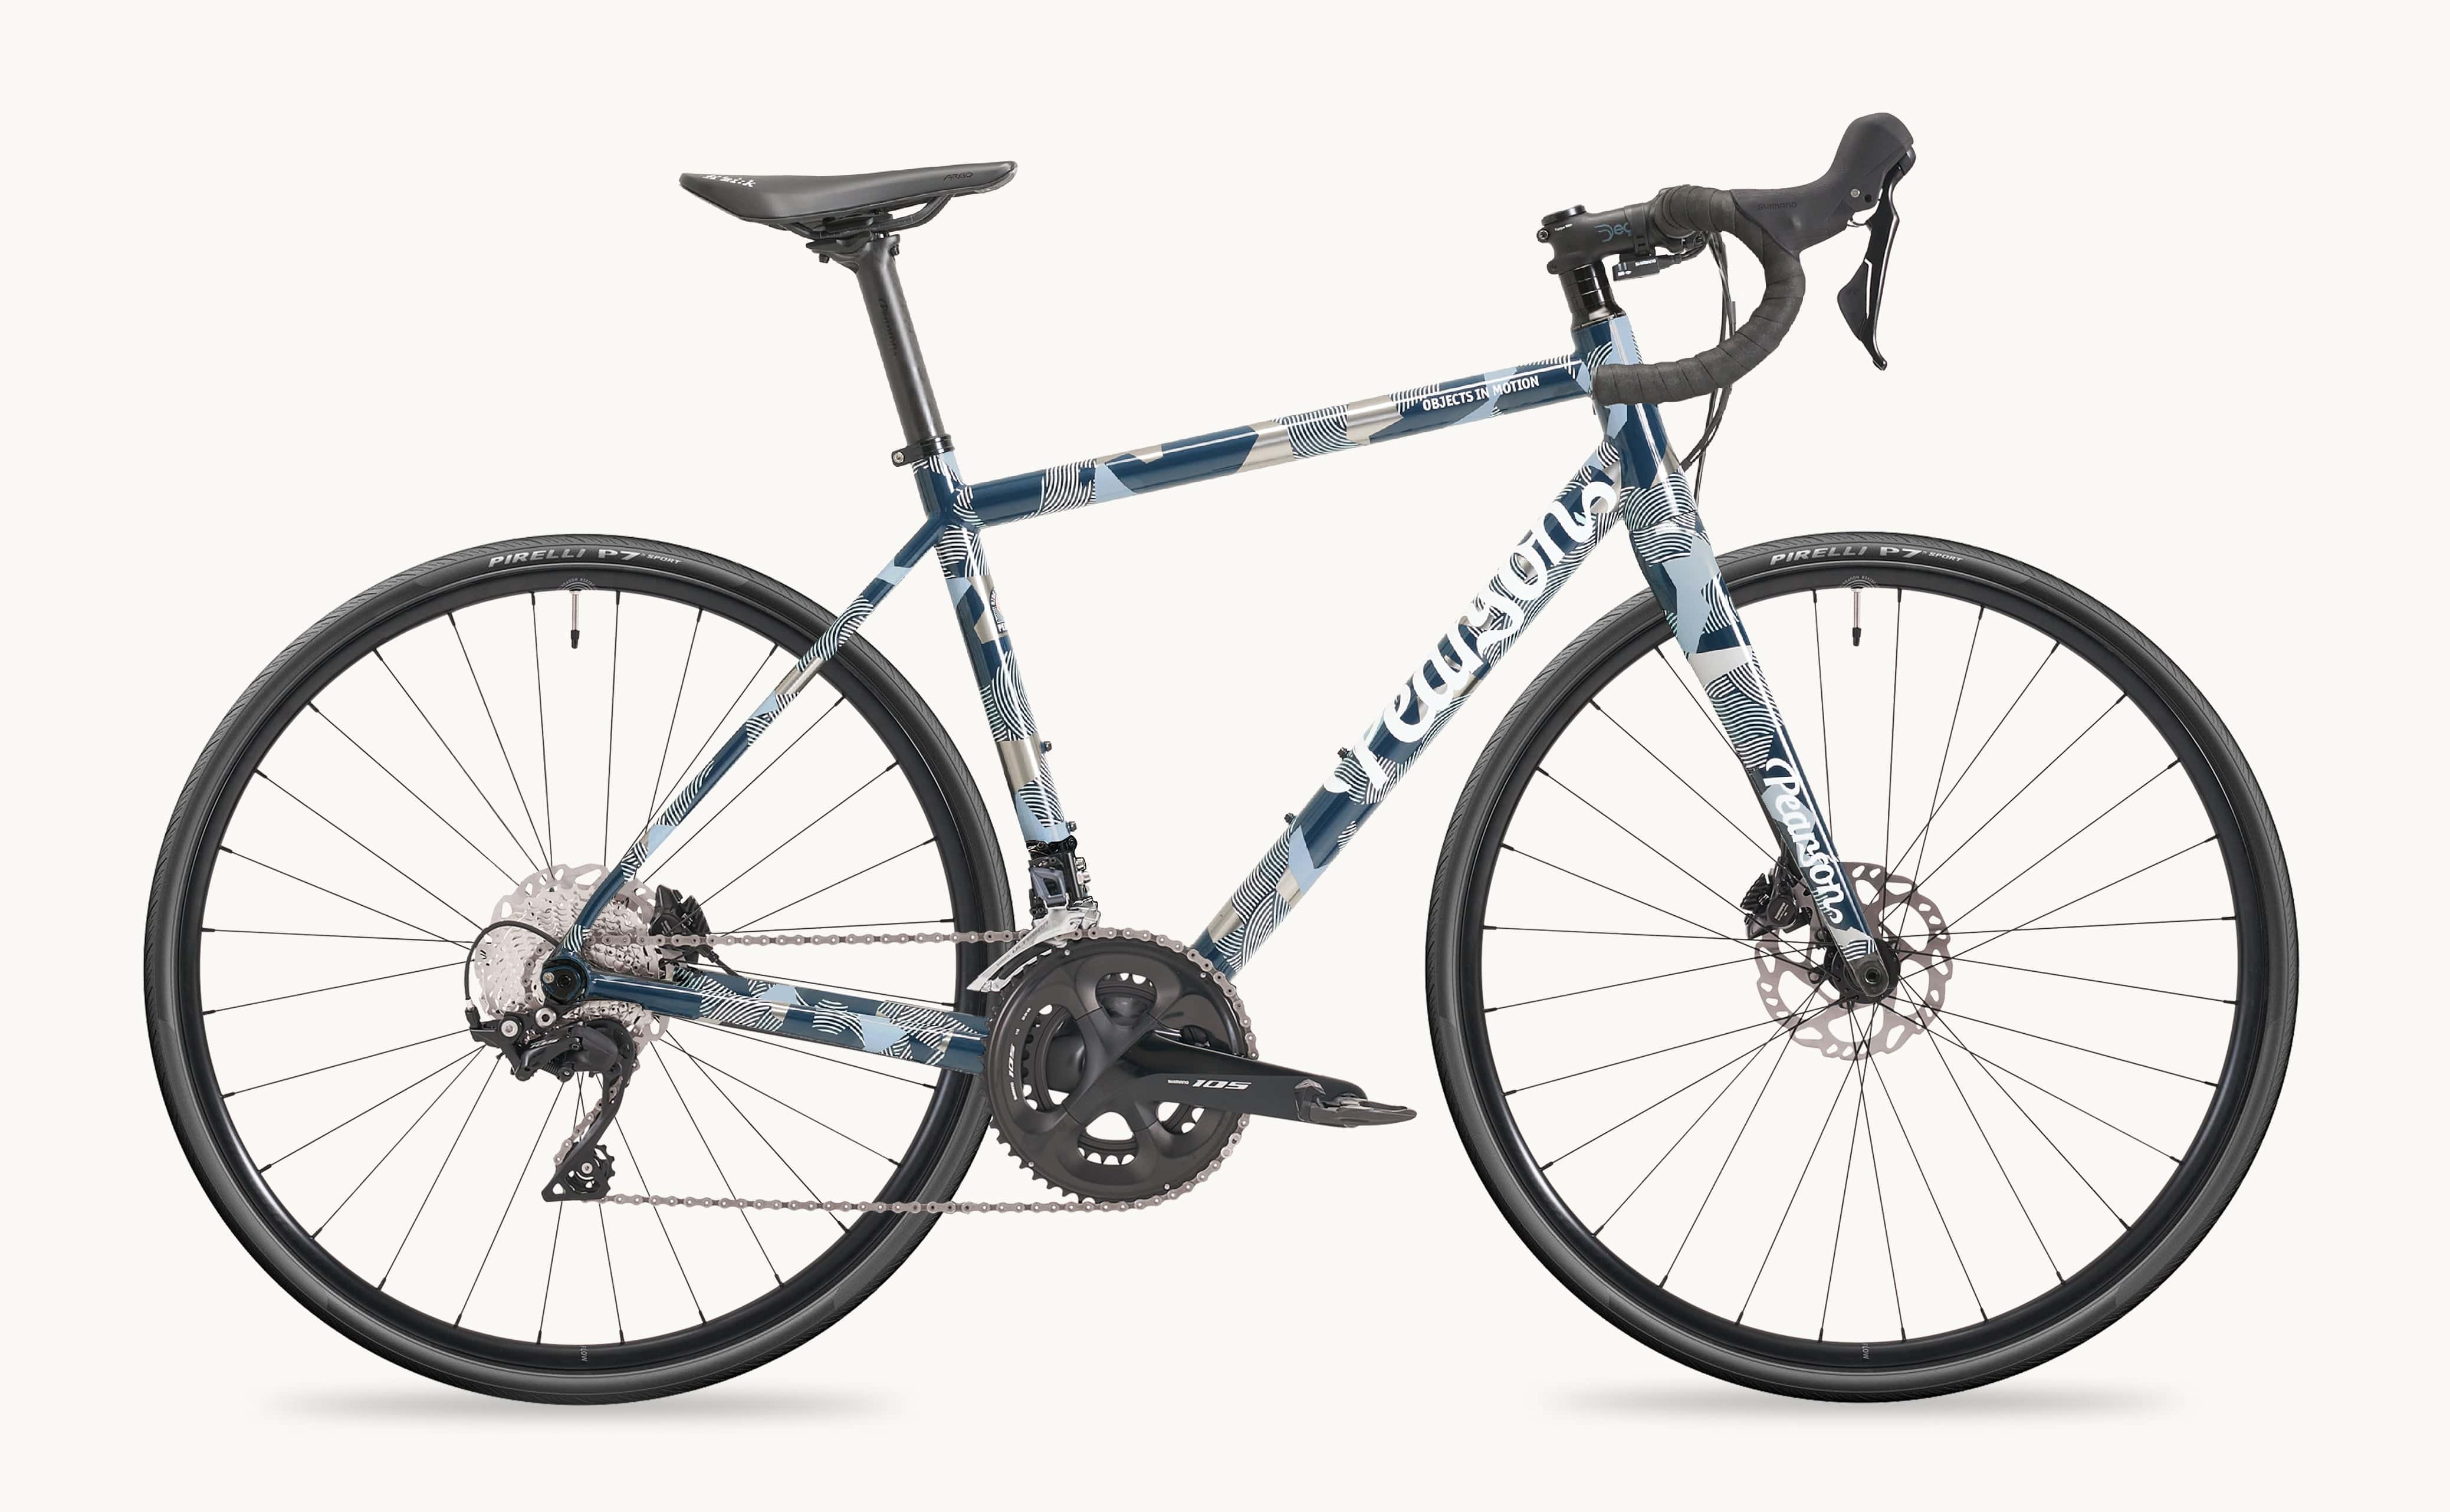 Pcs  Special Offer: Objects In Motion Shimano 105 - Titanium Road Bike  X-small / Blue Camo / Shimano 105 Mechanical - Pearson Ebb And Flow Alloy Wheels